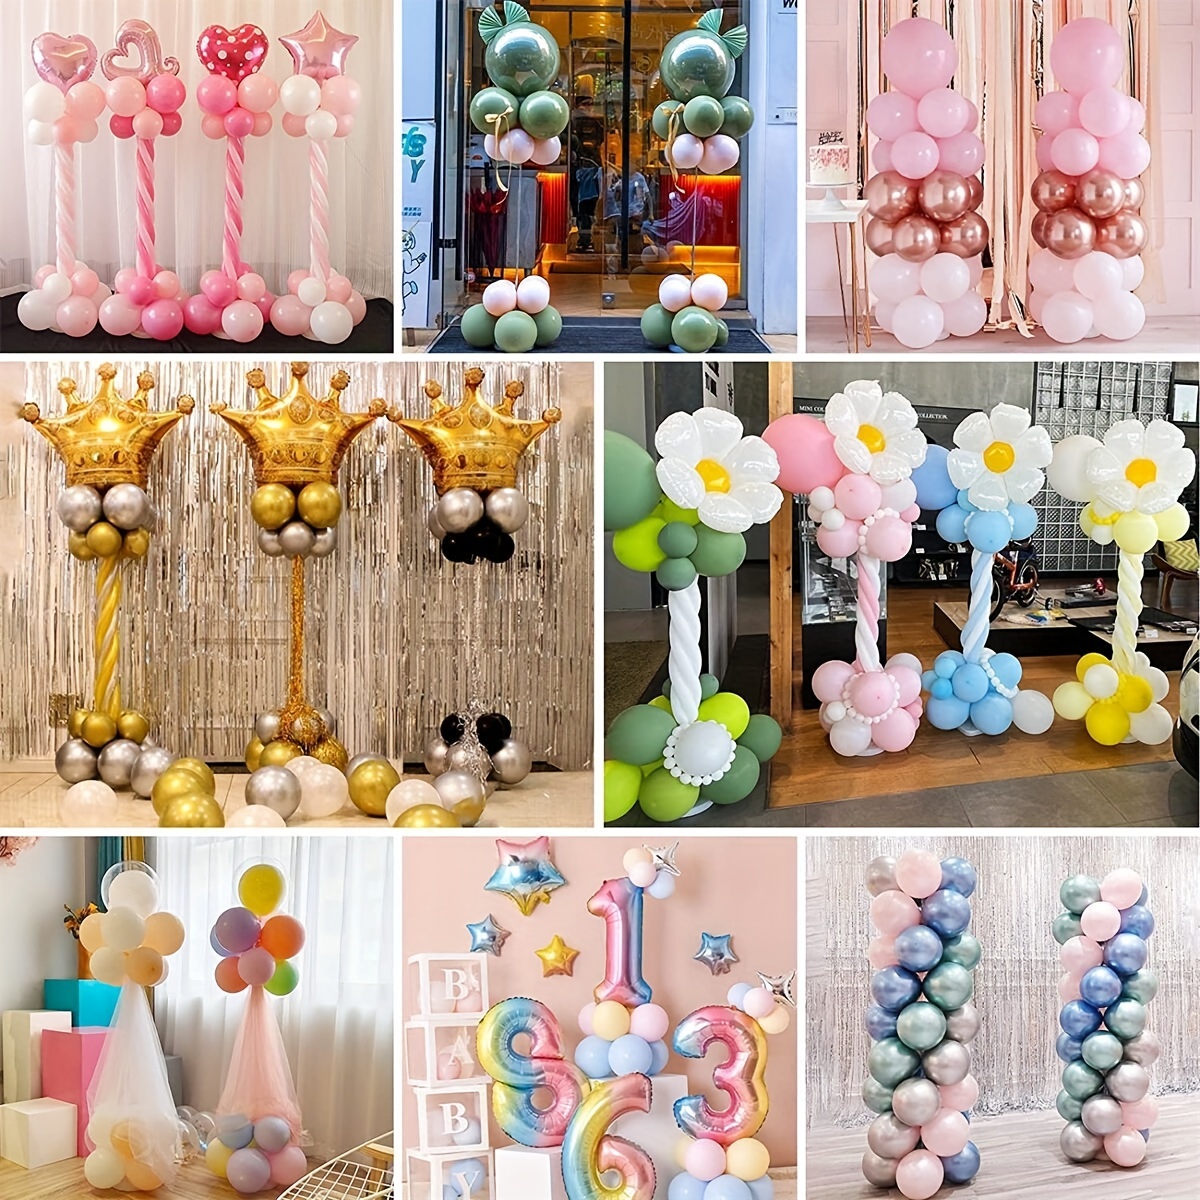 2sets, Balloon Stand Kit, Balloon Hold Stander, Balloon Accessories,  Prefect For Wedding, Christmas, Thanksgiving, Spring Festival, Birthday  Party Dec